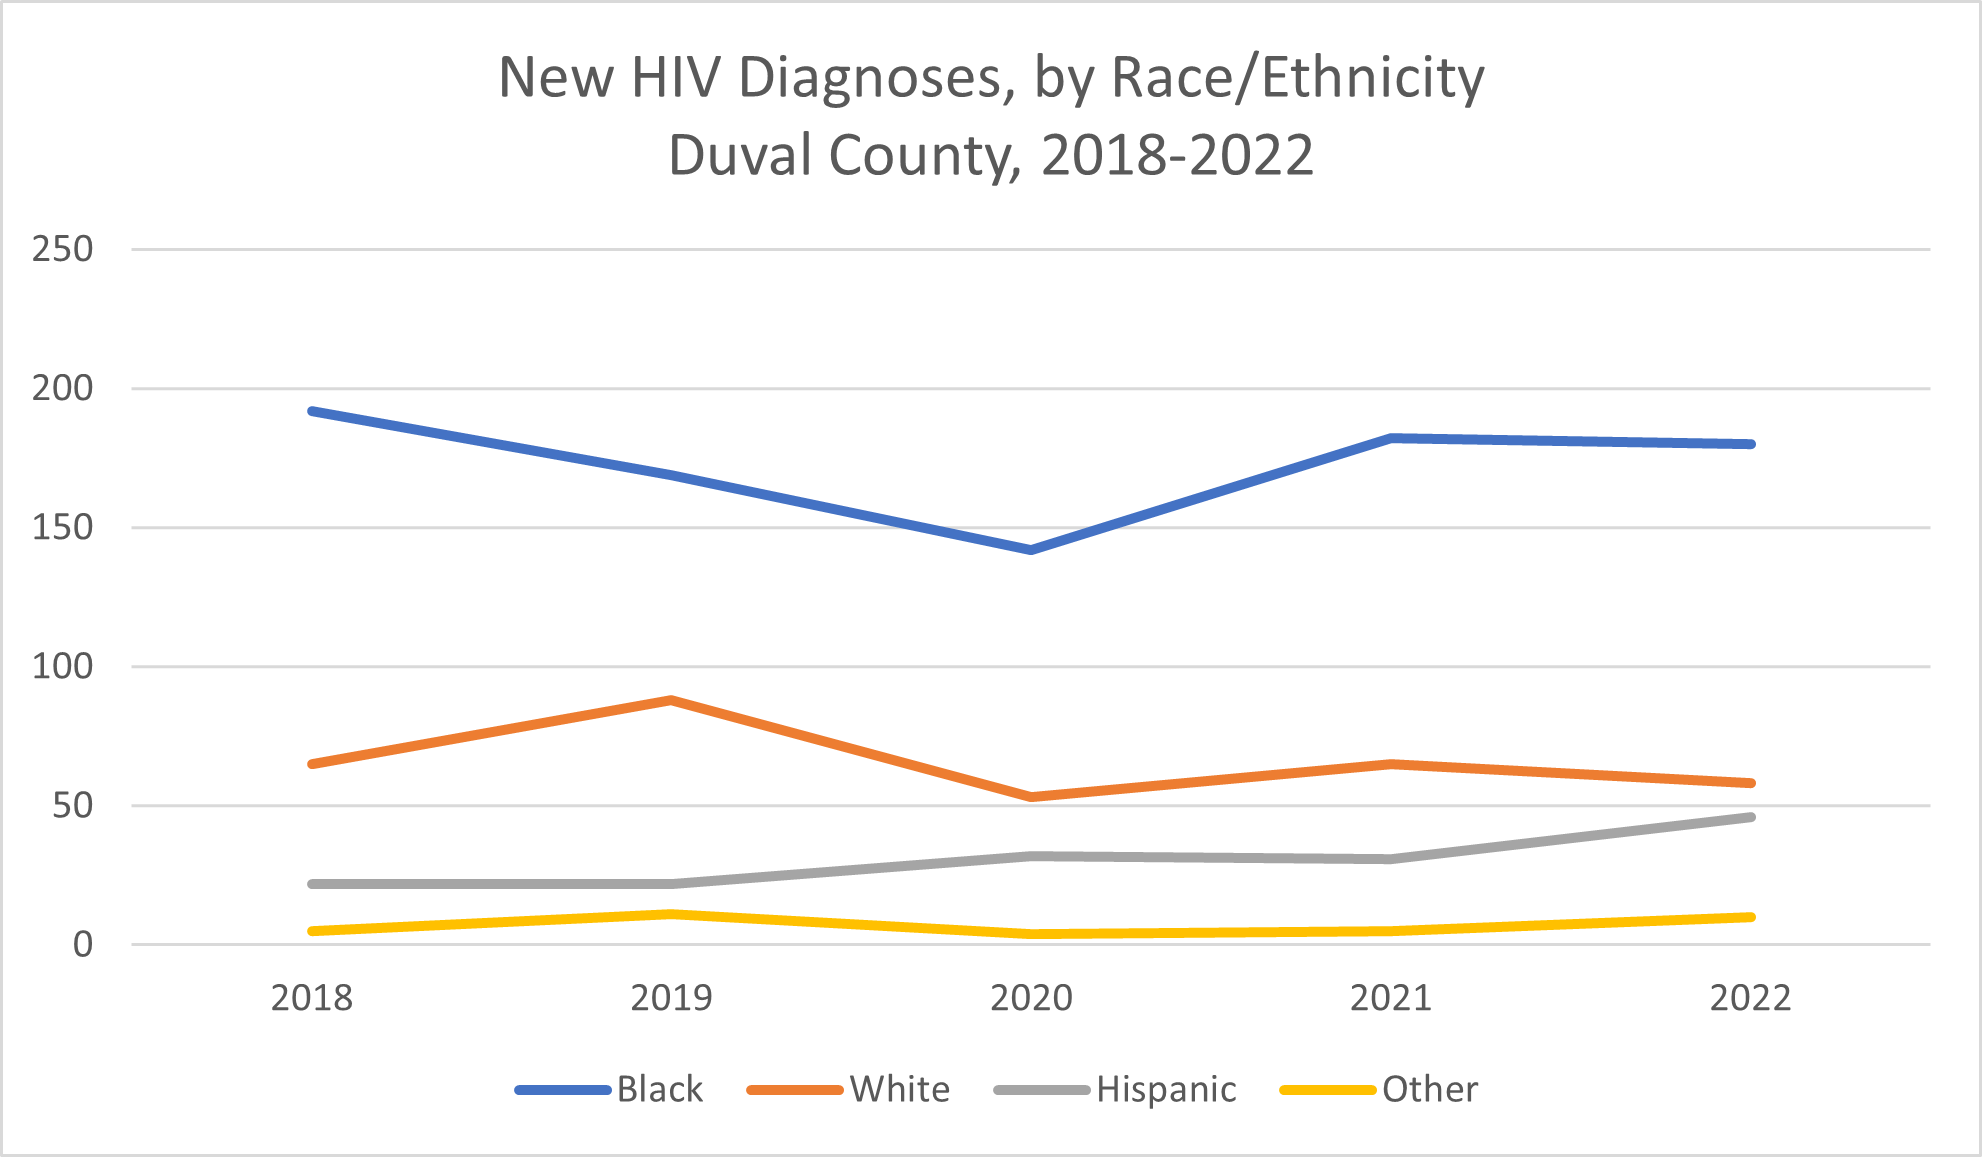 New HIV Diagnoses, by Race/Ethnicity Duval County, 2018-2022